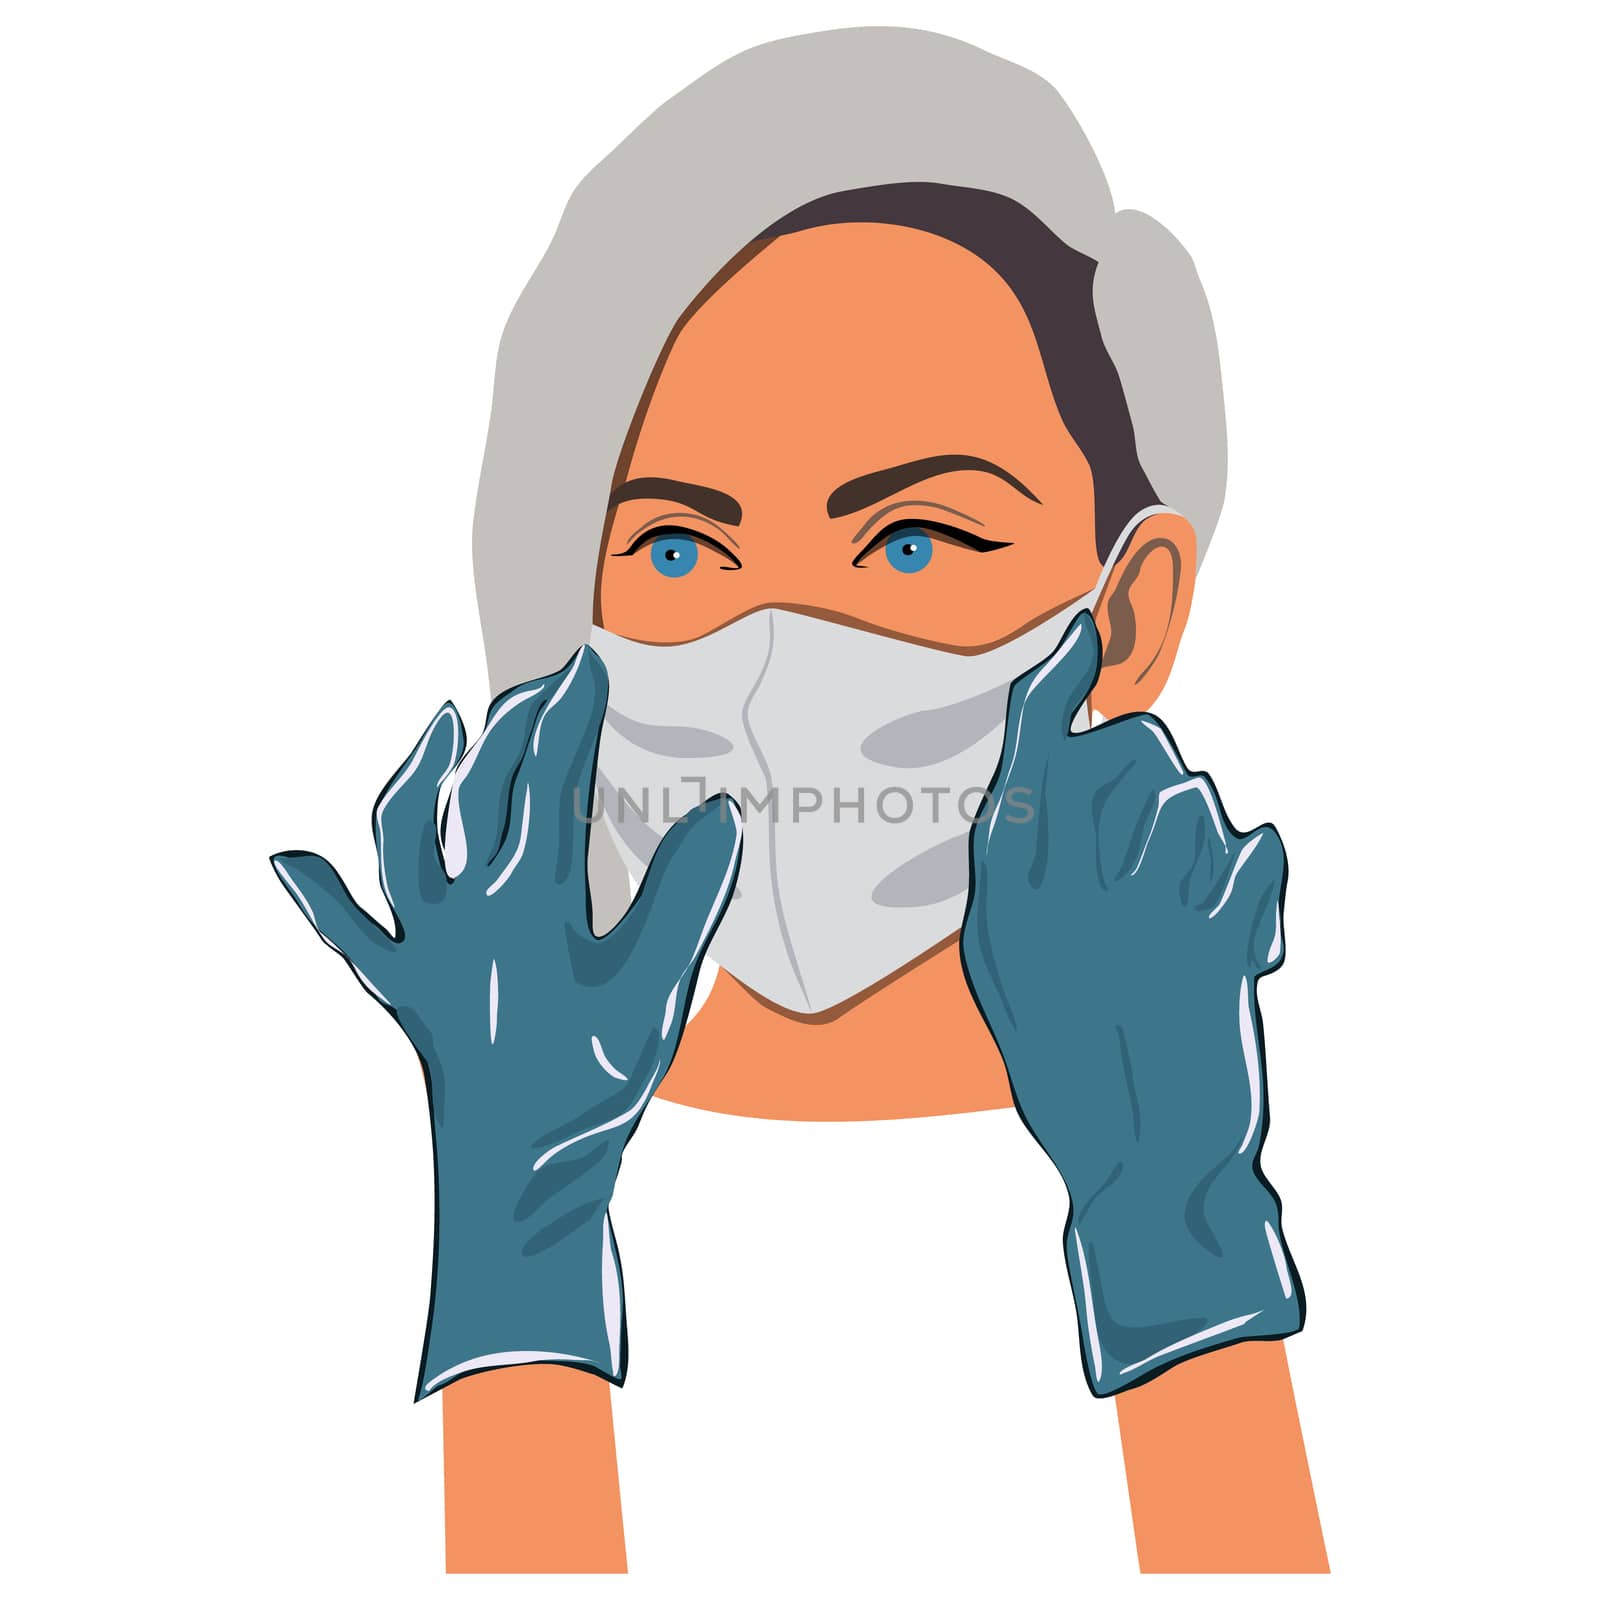 Female wearing protective medical mask with gloves. Medical hygiene mask. Virus protection. Vector illustration isolated on white background.